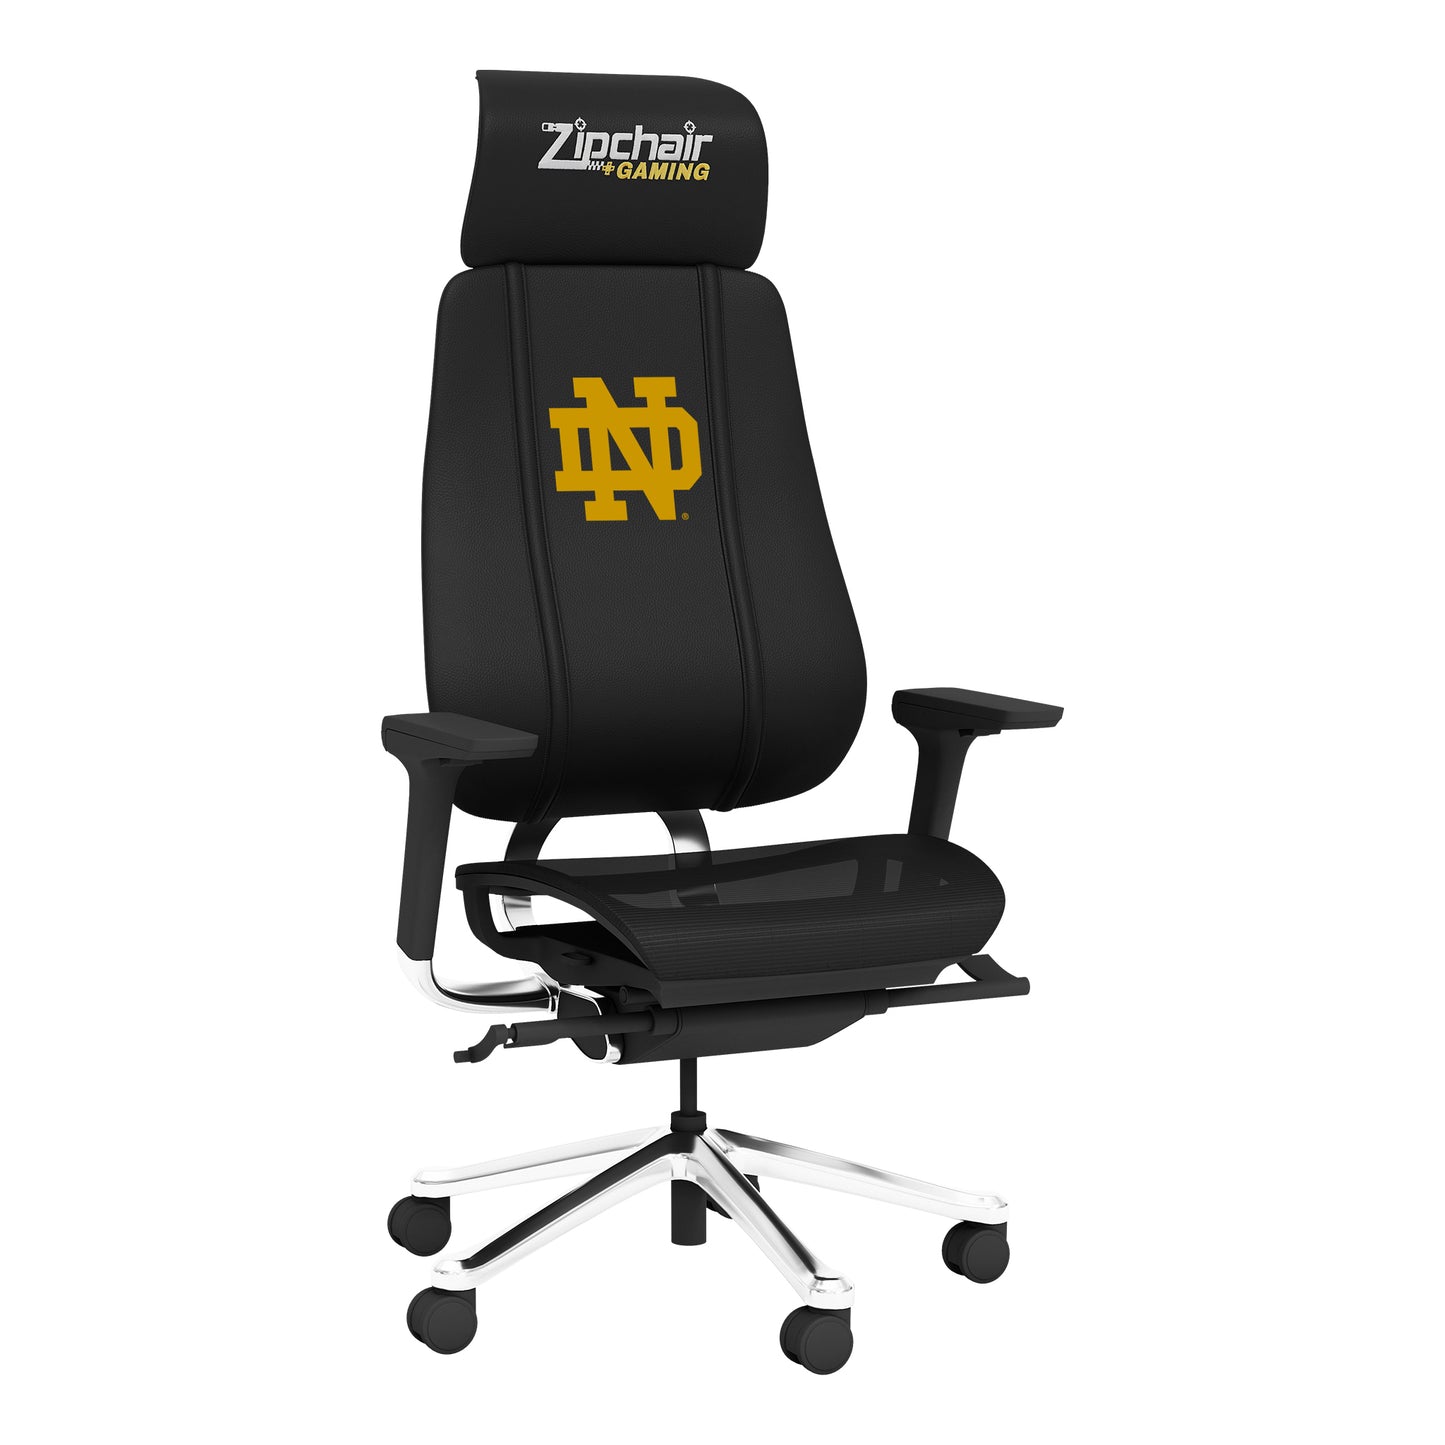 PhantomX Mesh Gaming Chair with Notre Dame Primary Logo